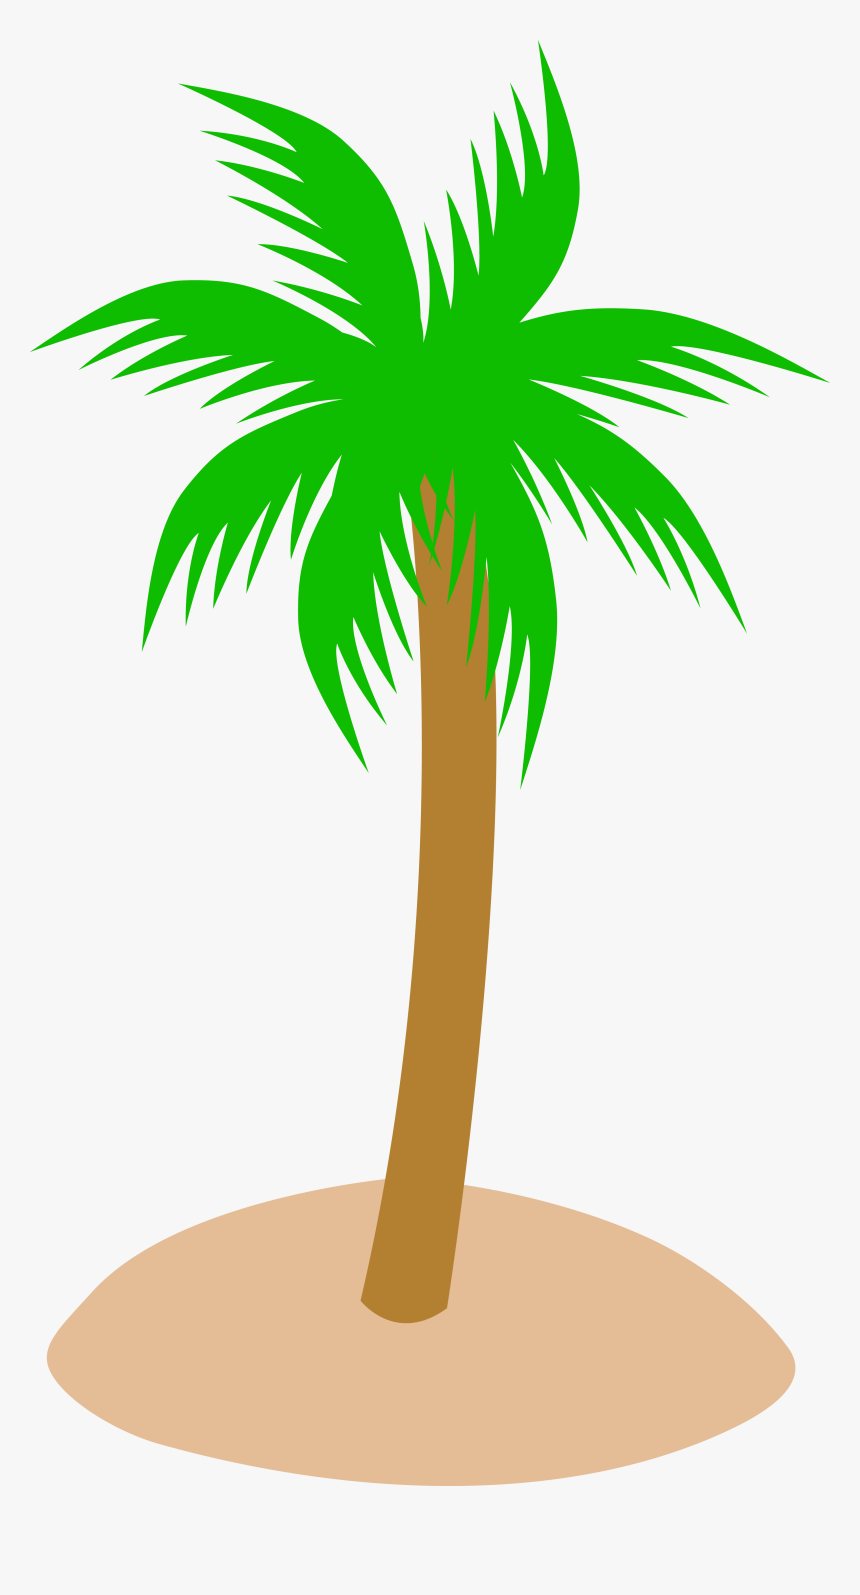 Transparent Palmtree Png - Cartoon Palm Tree No Background, Png Download, Free Download